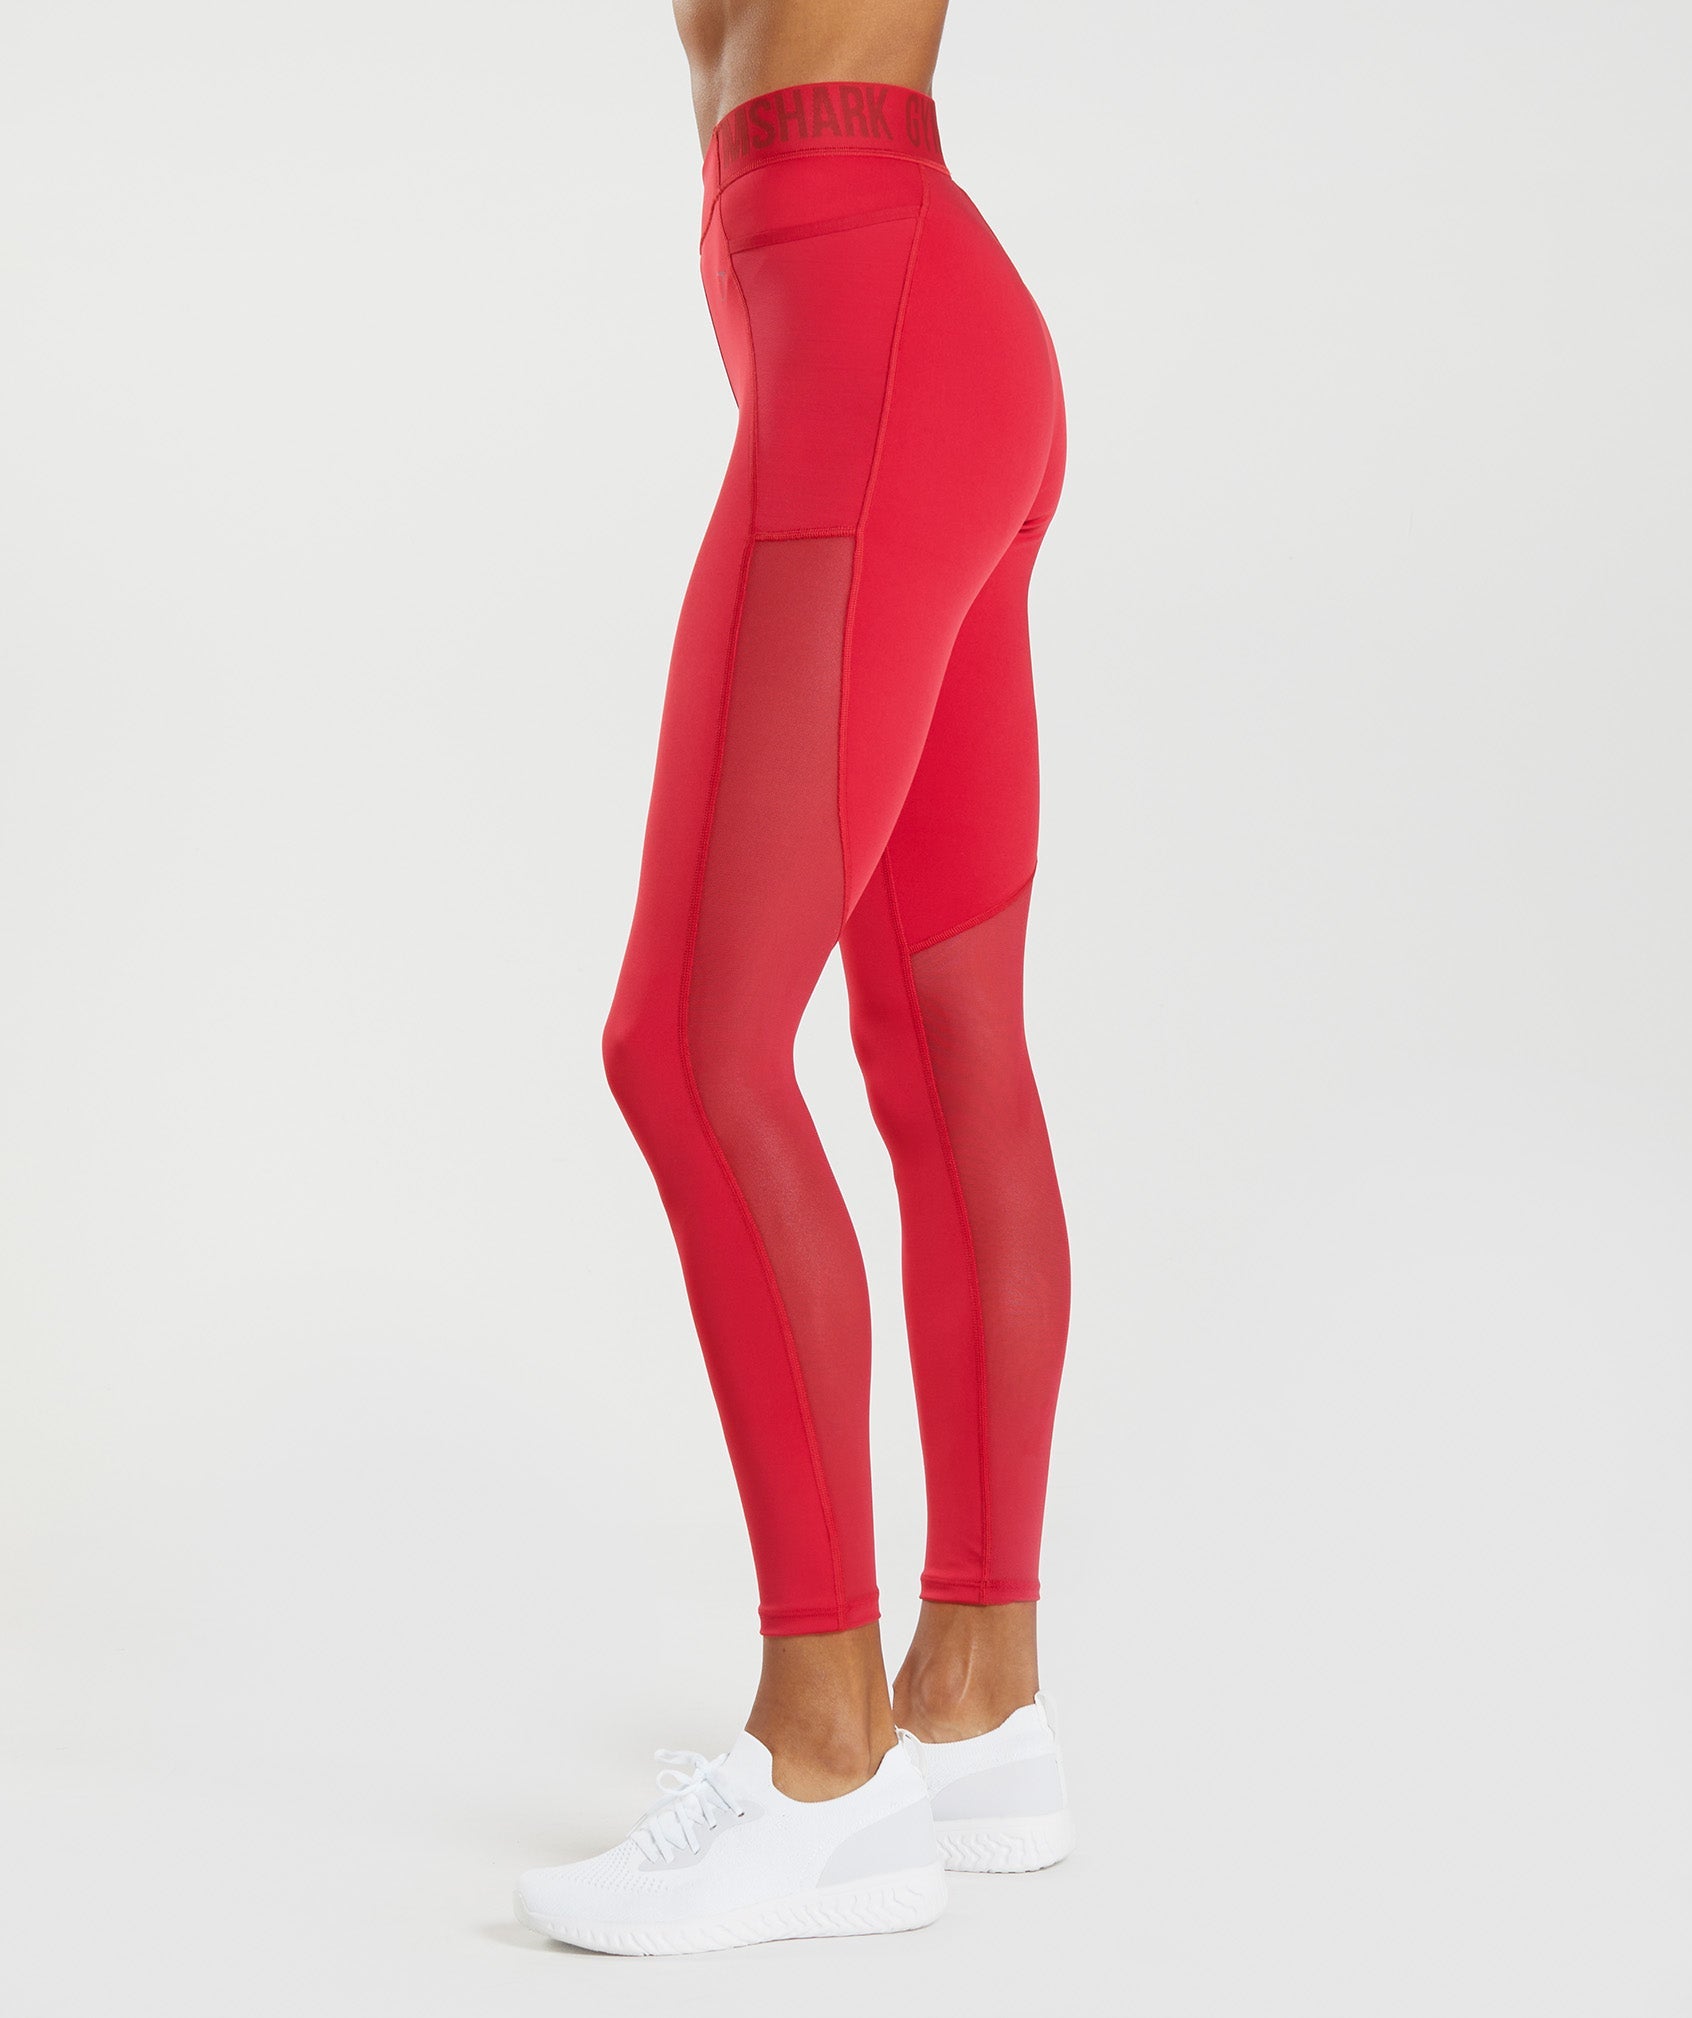 Gymshark Training leggings, Medium Red - $40 New With Tags - From Kat